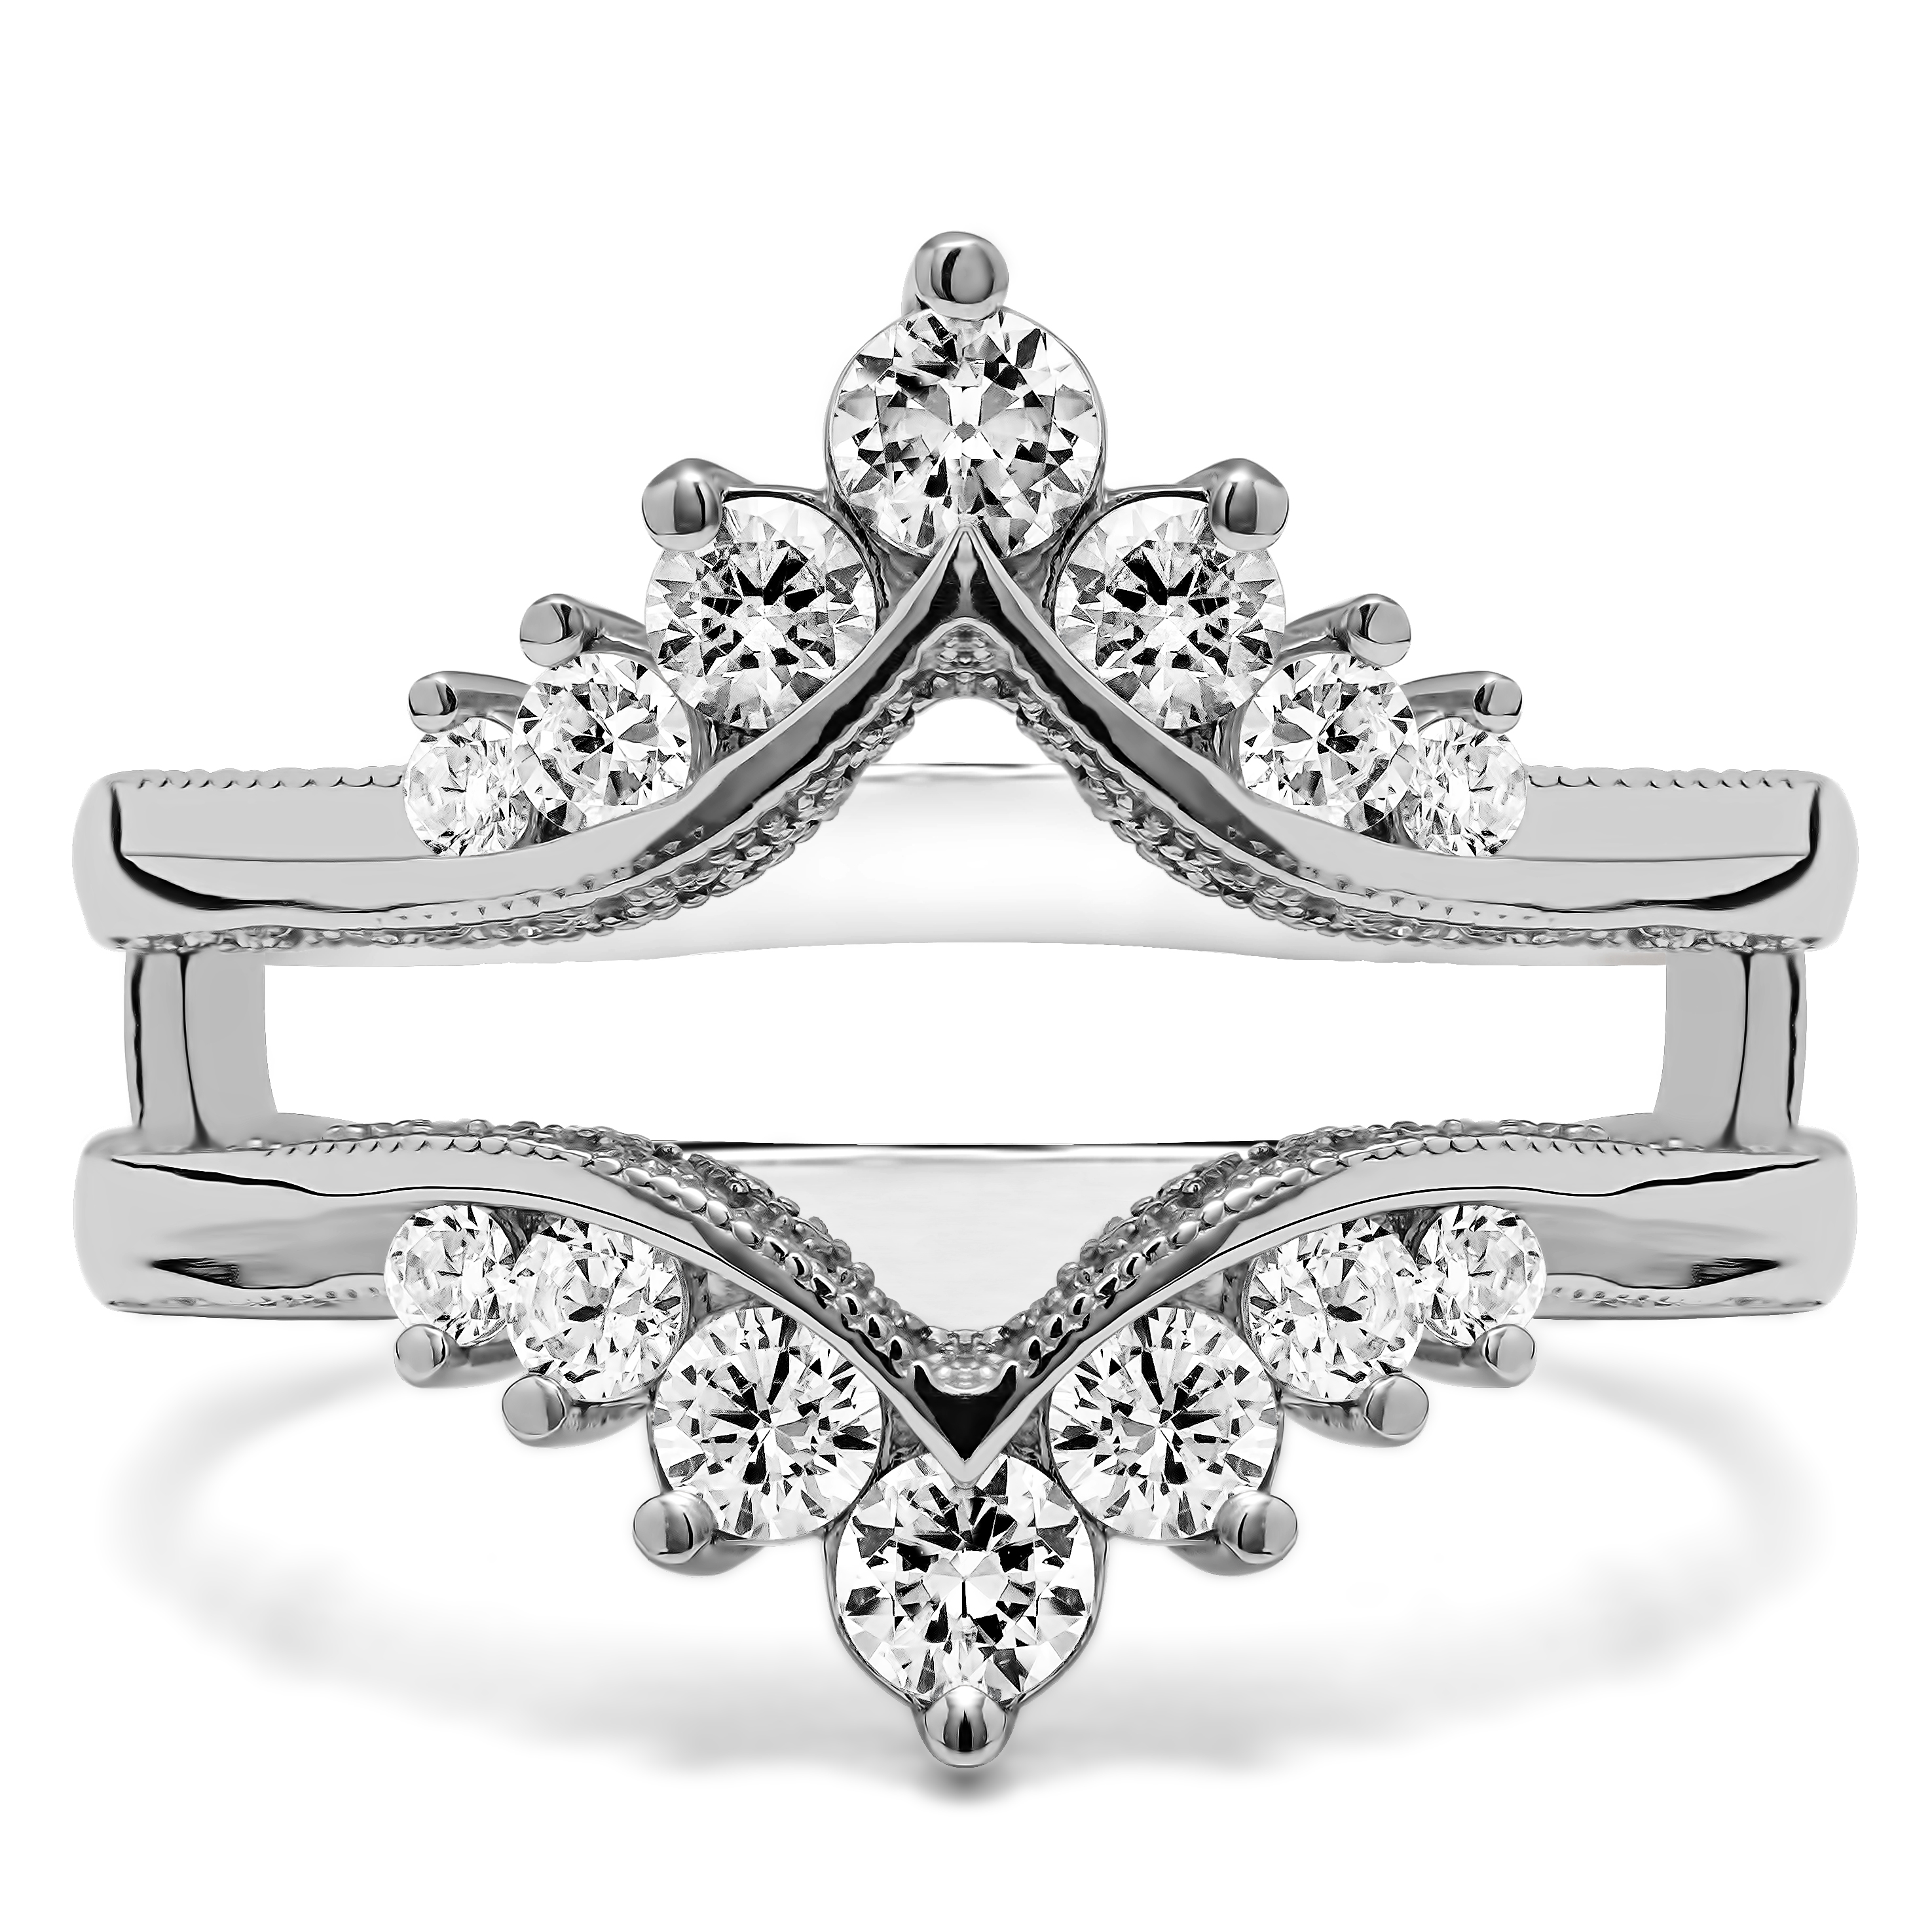 TwoBirch Chevron Style Ring Guard with Millgrained Edges and Filigree Cut Out Design in Sterling Silver with Cubic Zirconia (0.74 CT)